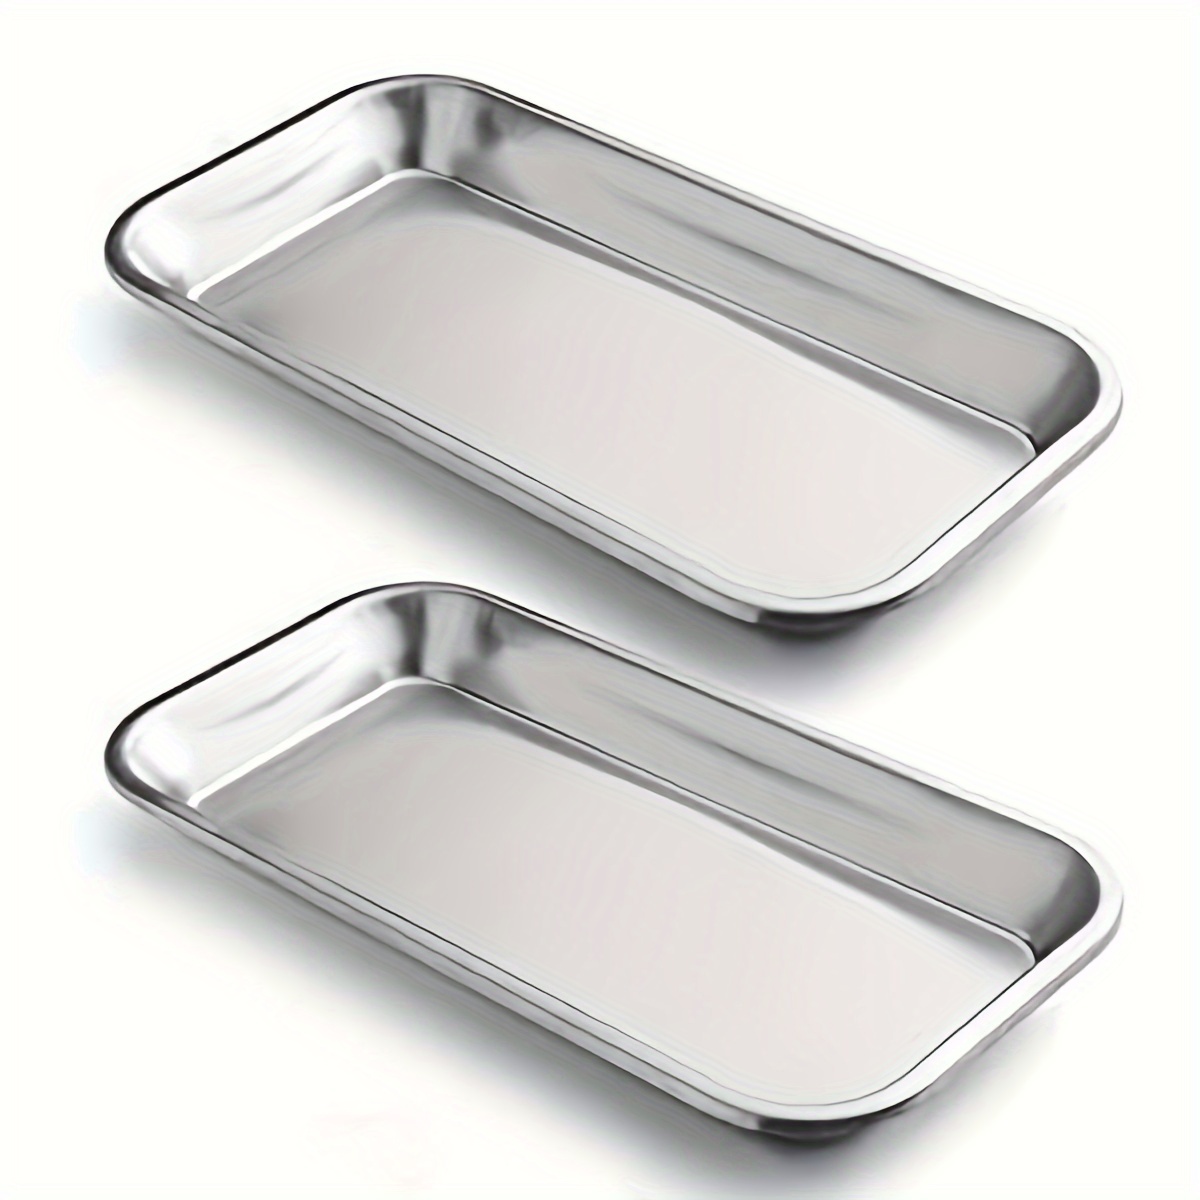 

2pcs Tattoo Supplies Tray, Stainless Steel Tray For Lab Instrument Supplies, Tattoo Tool (silvery)